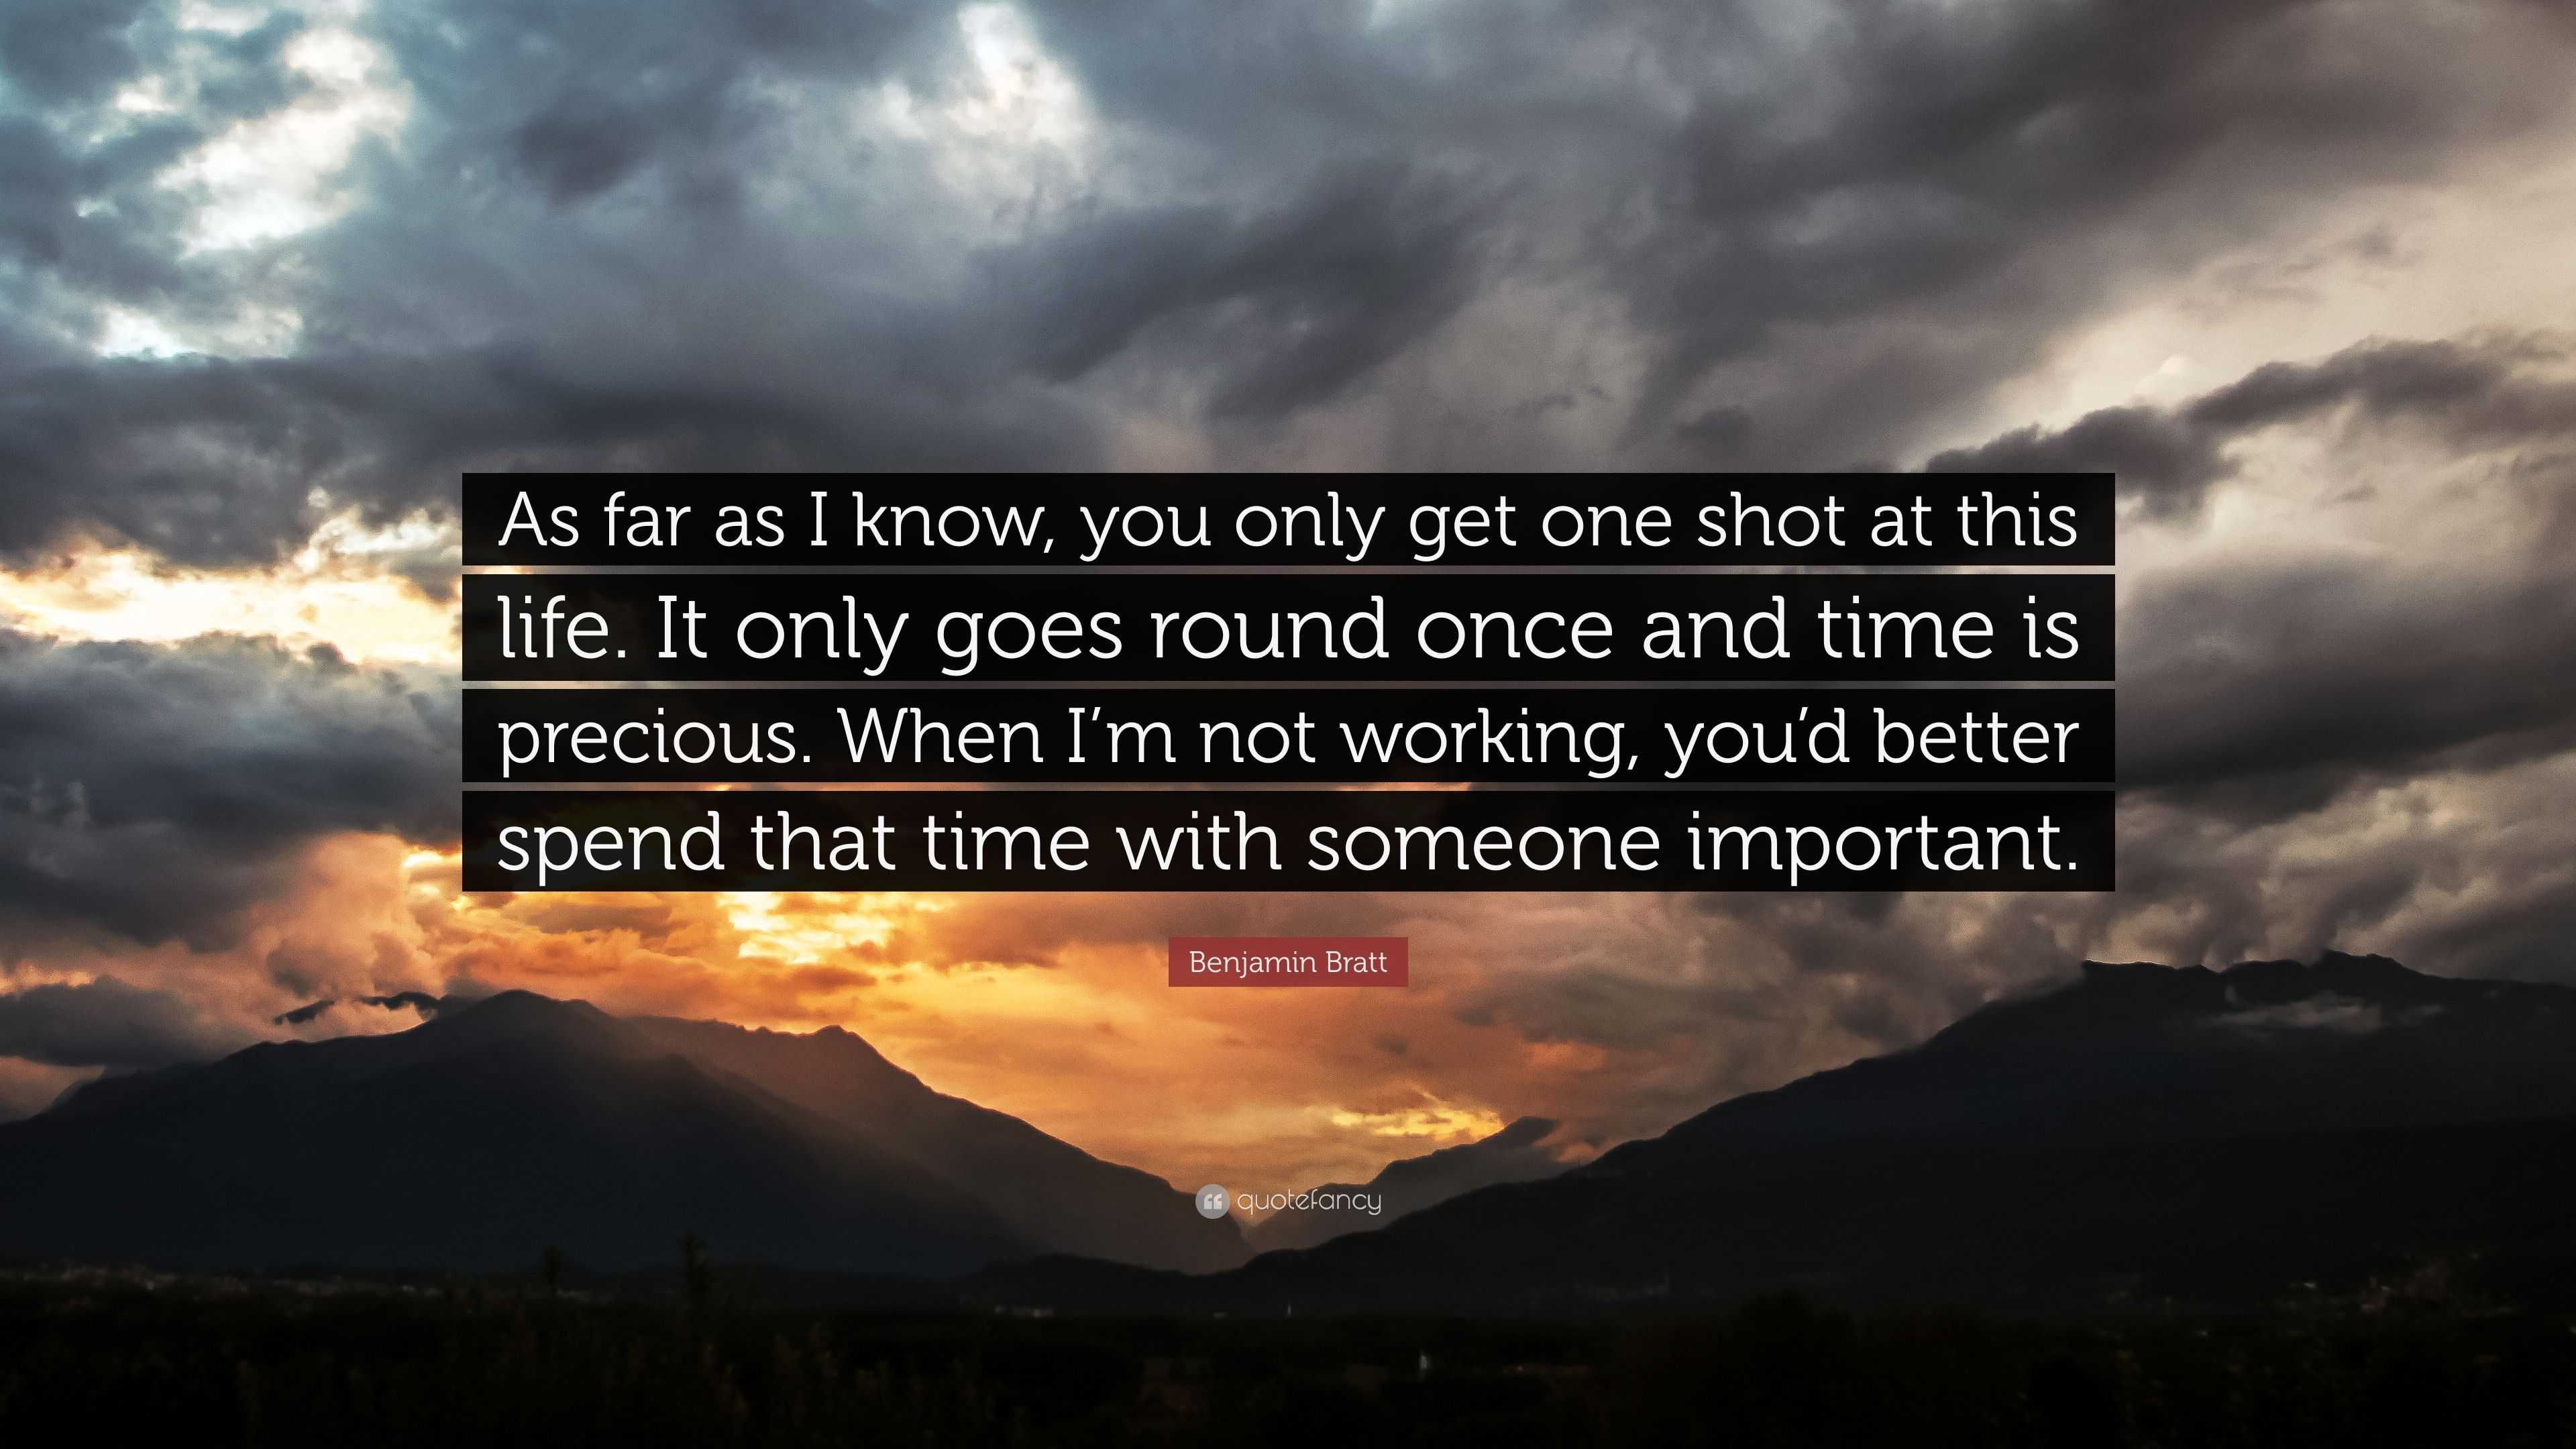 Benjamin Bratt Quote “As far as I know you only one shot